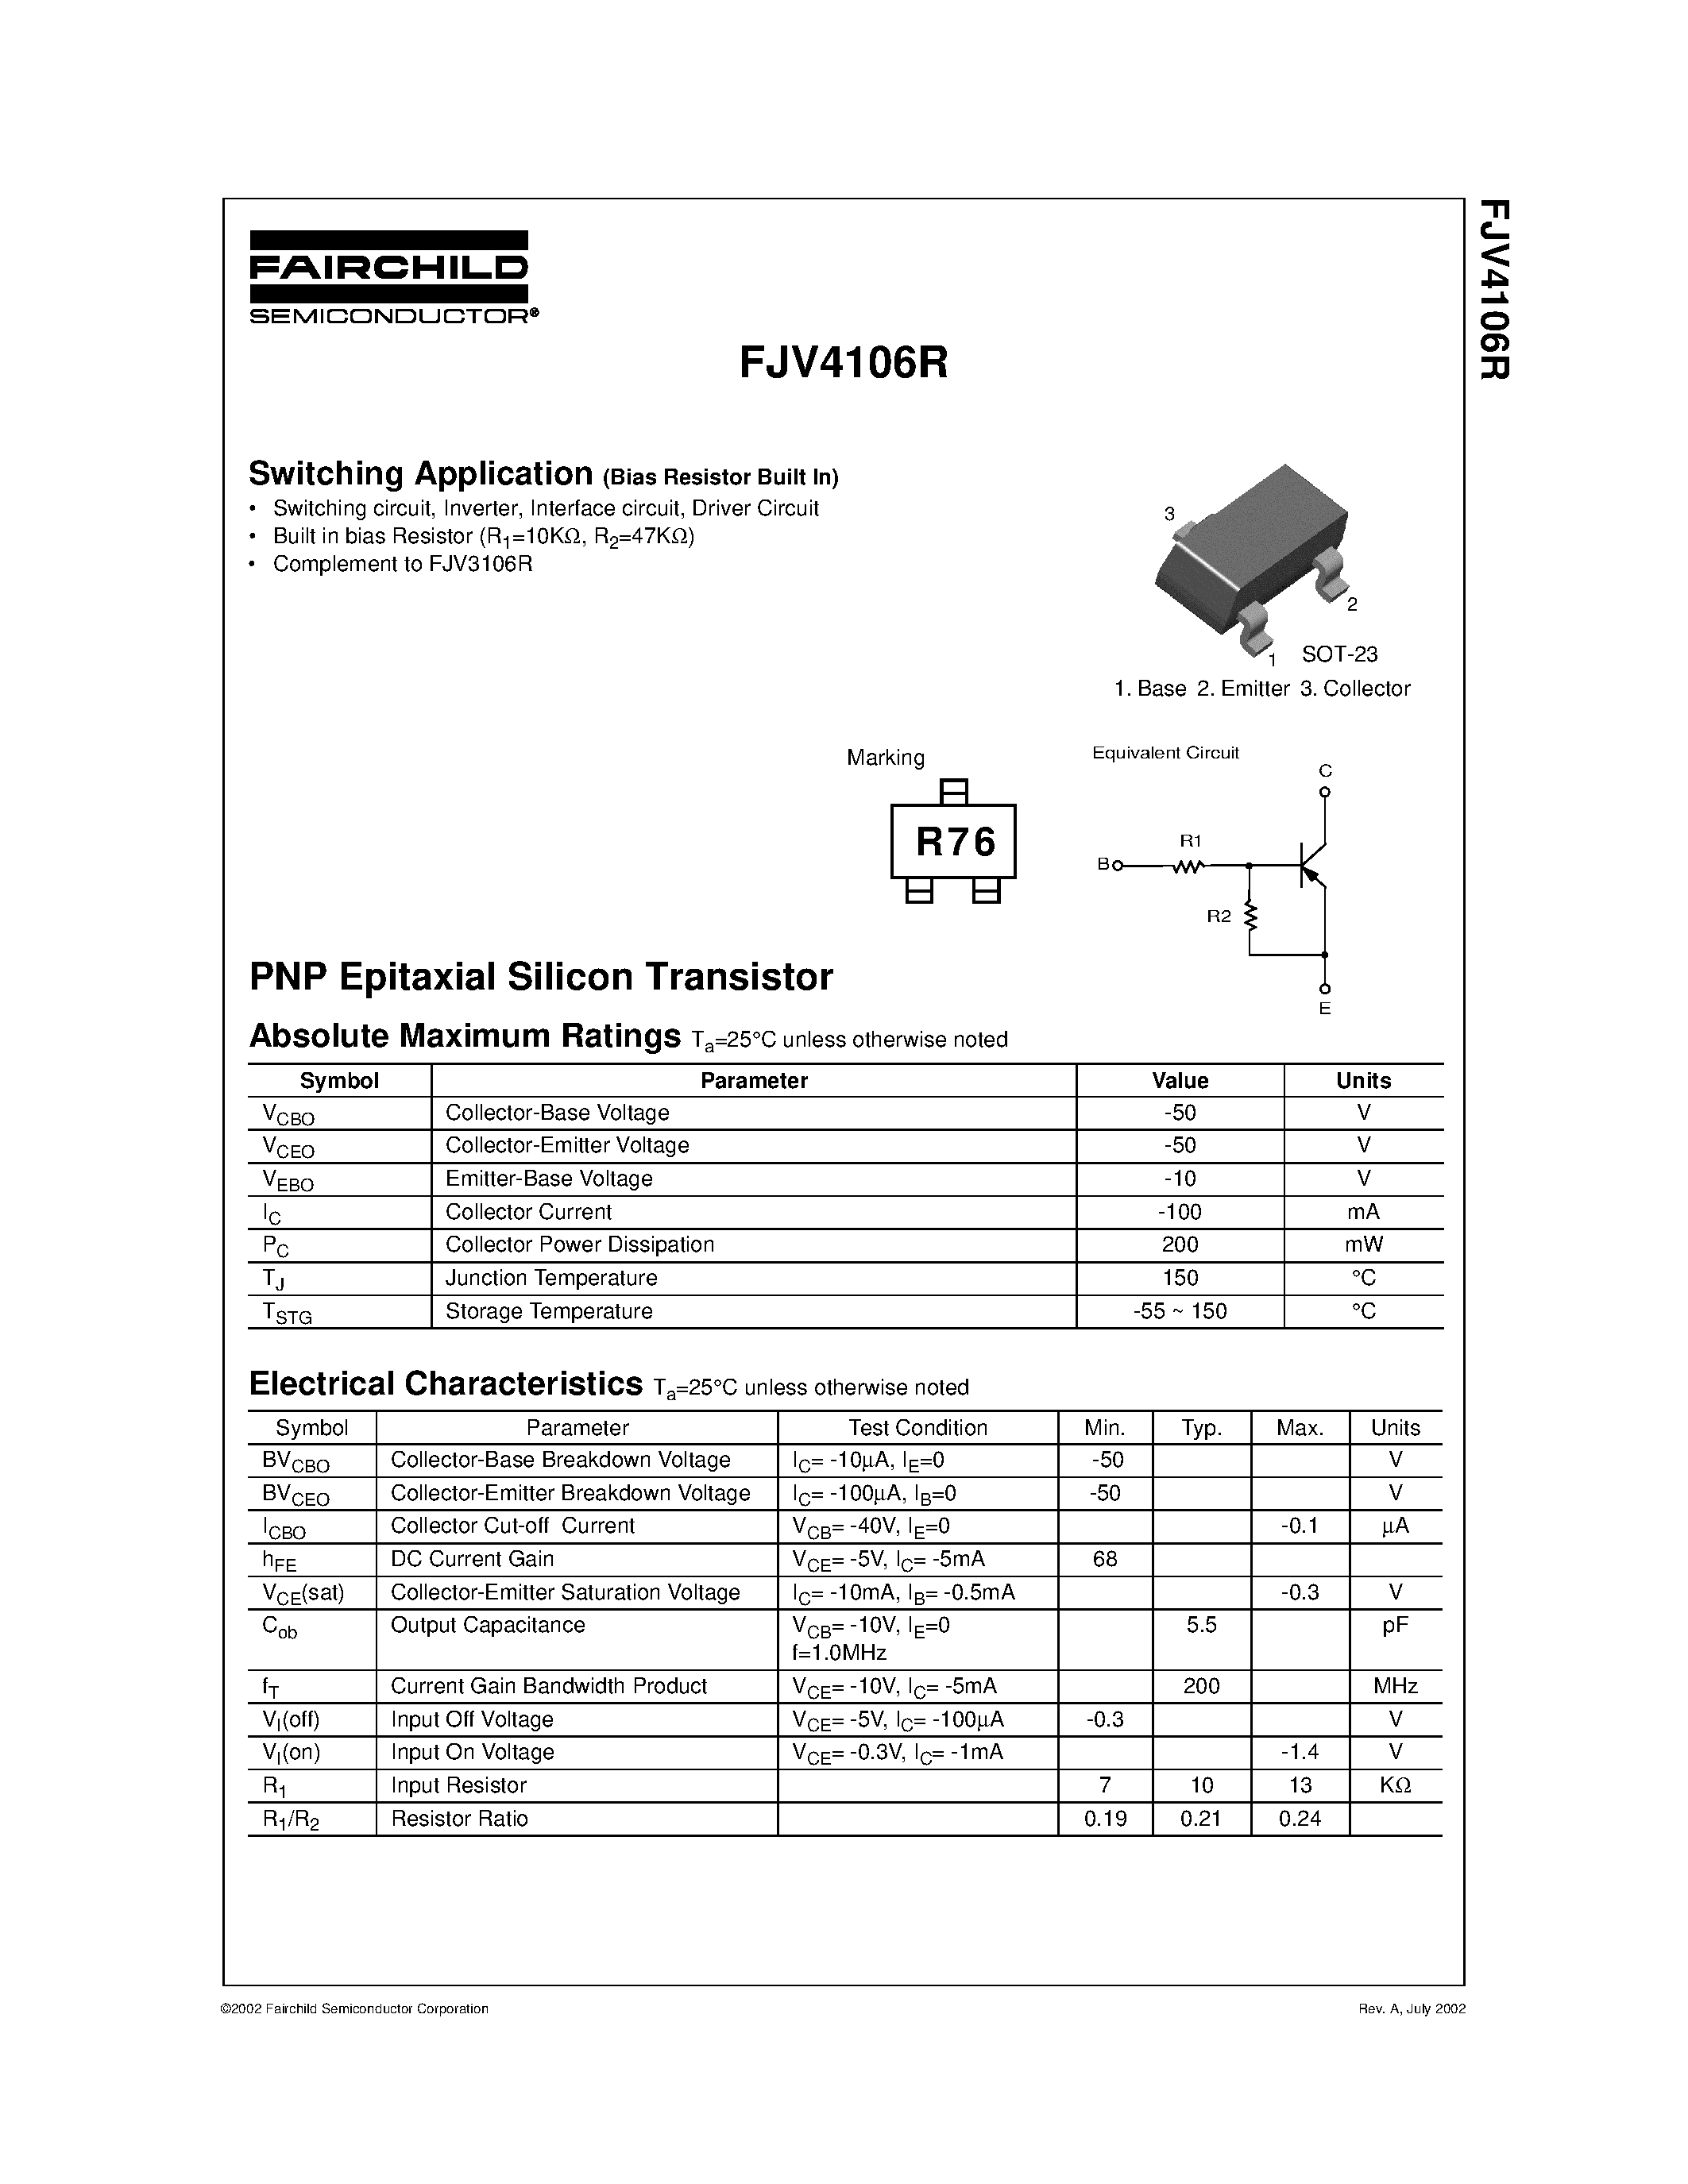 Даташит FJV4106R - PNP Epitaxial Silicon Transistor страница 1